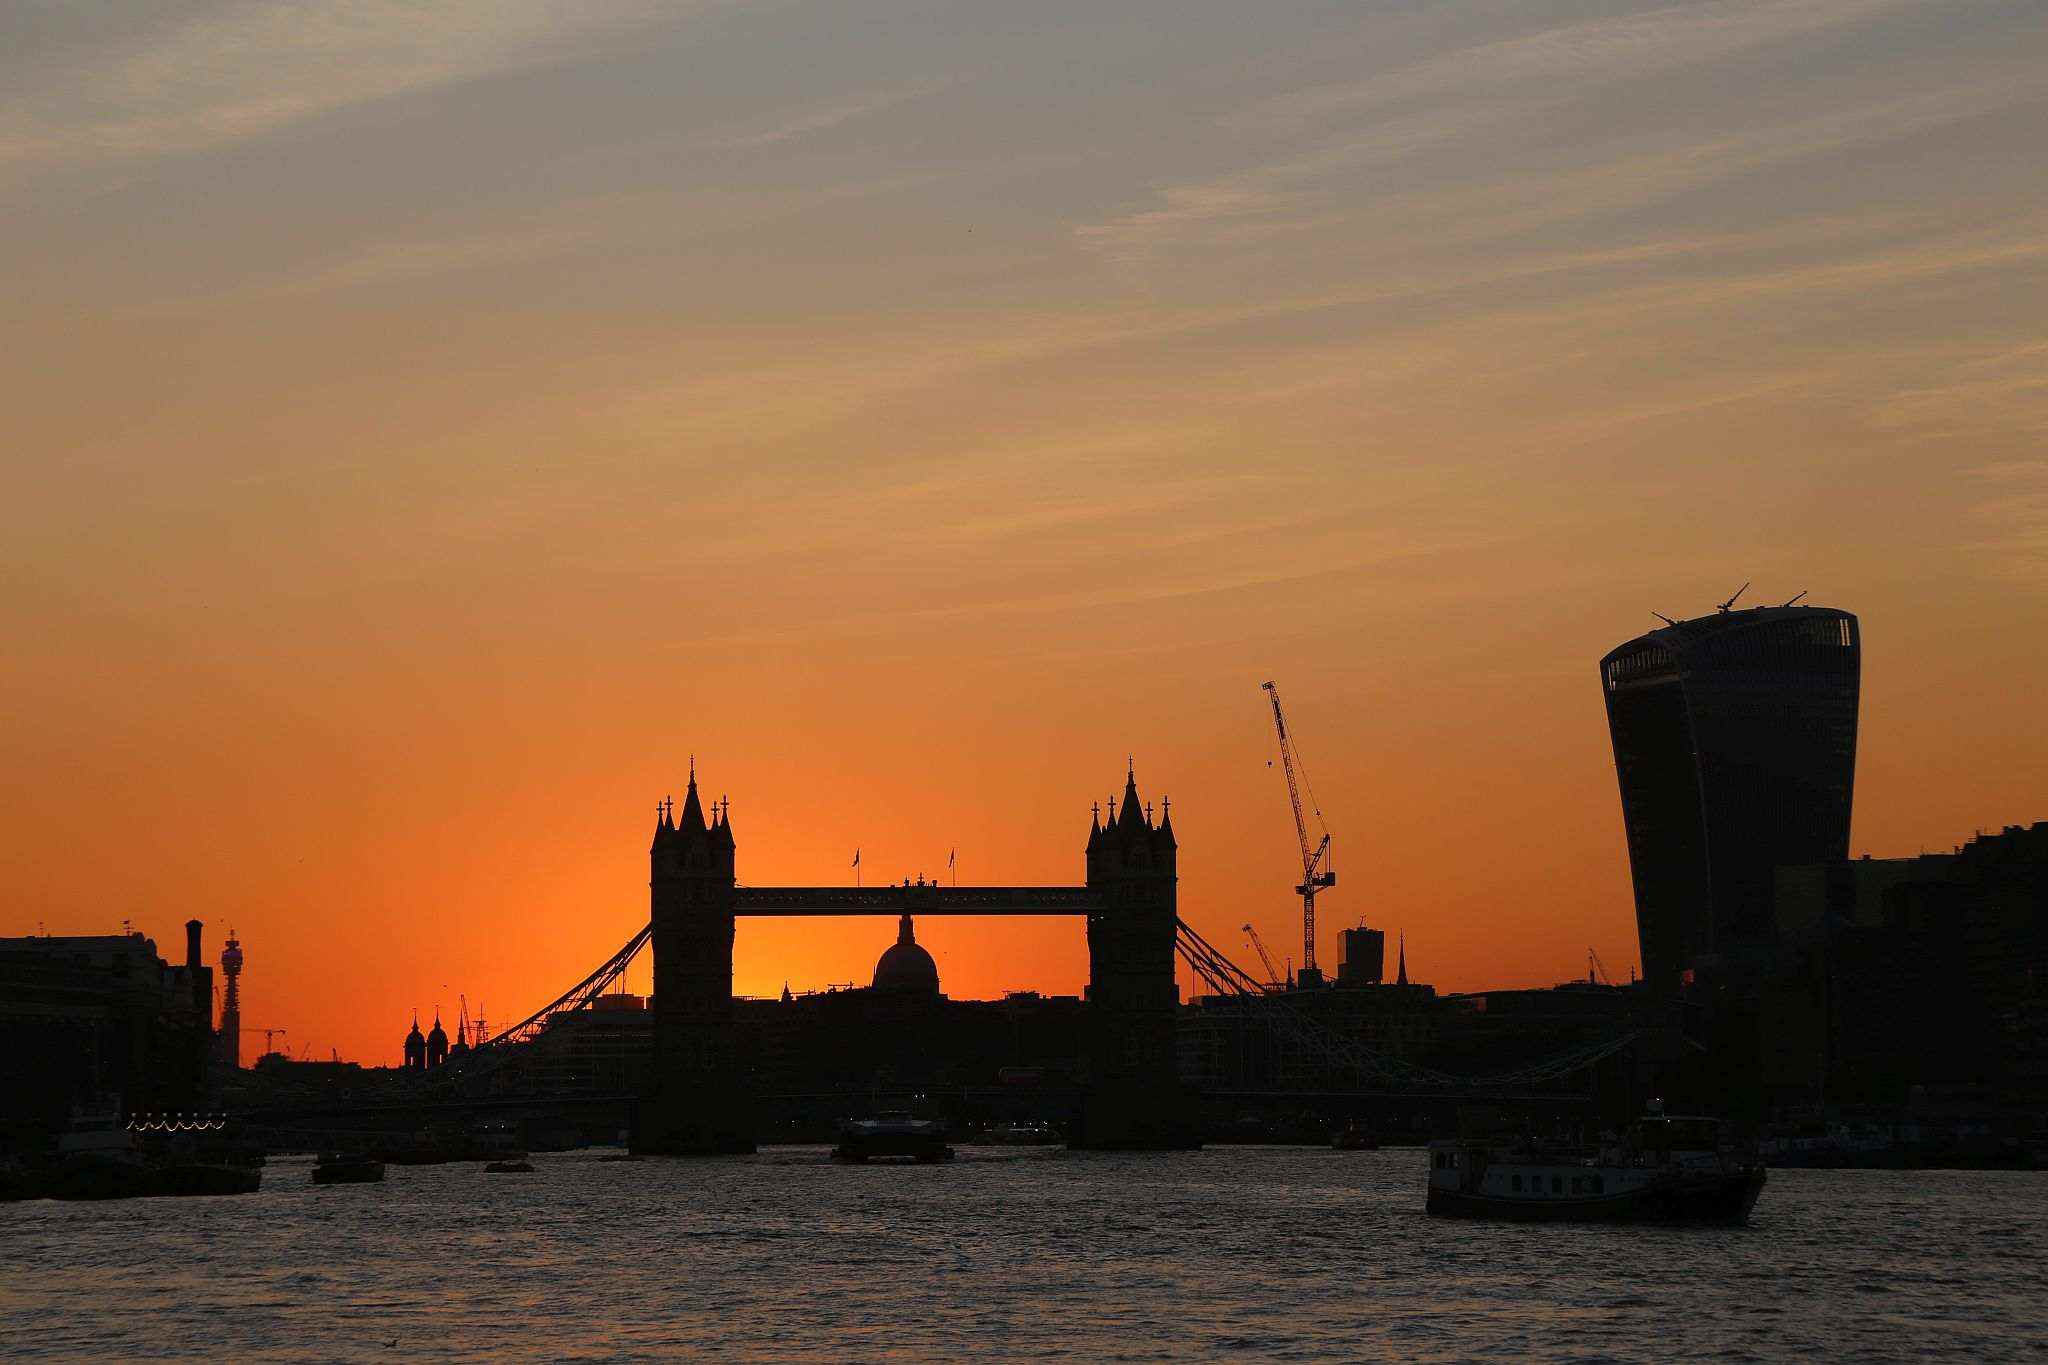 Tower Bridge, on the River Thames in London, at sunset. 04-Aug-2018.